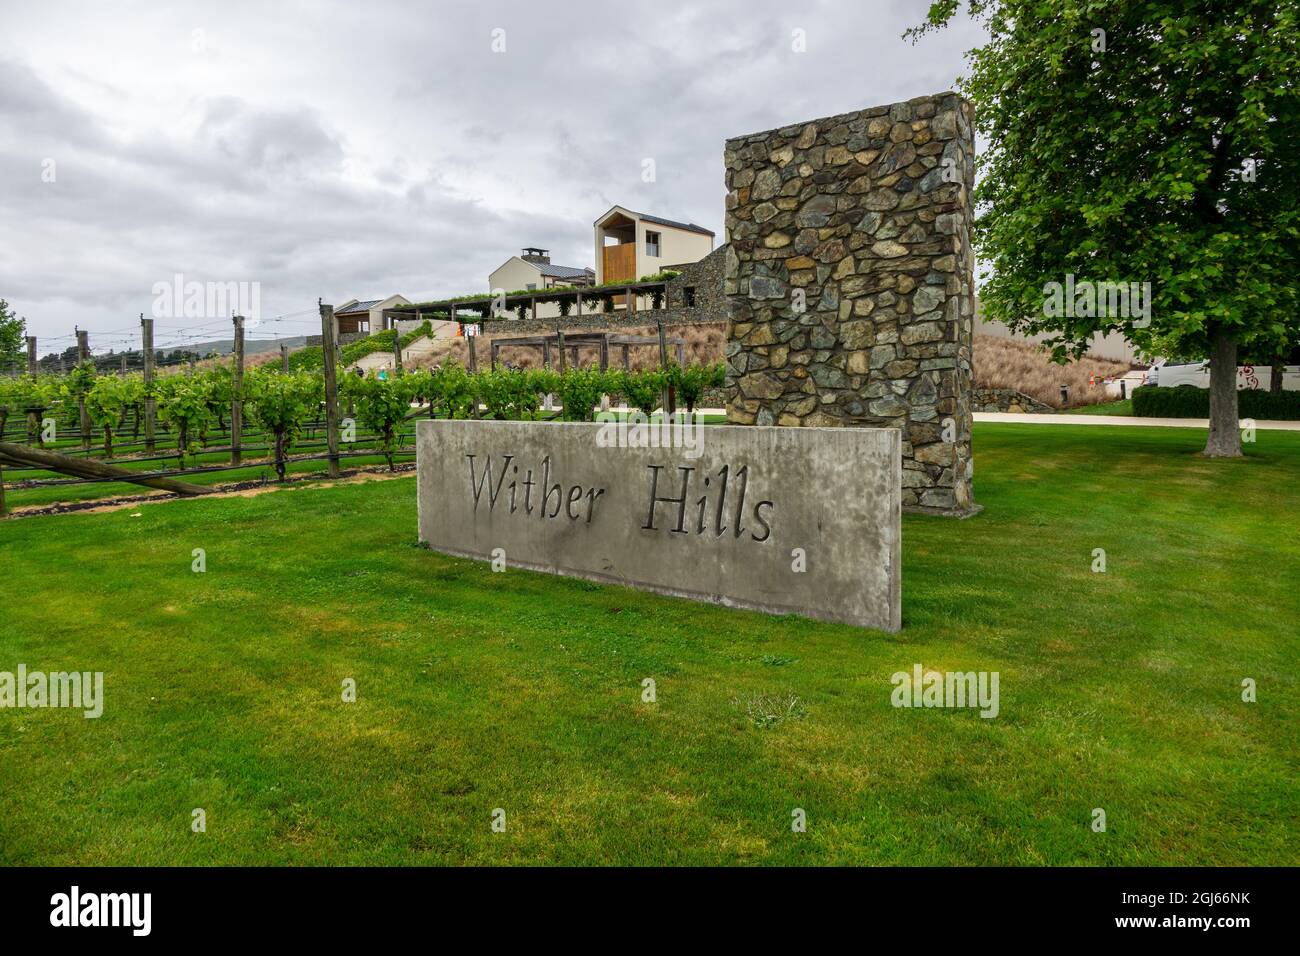 Wither Hills Winery In Burleigh New Zealand Stock Photo